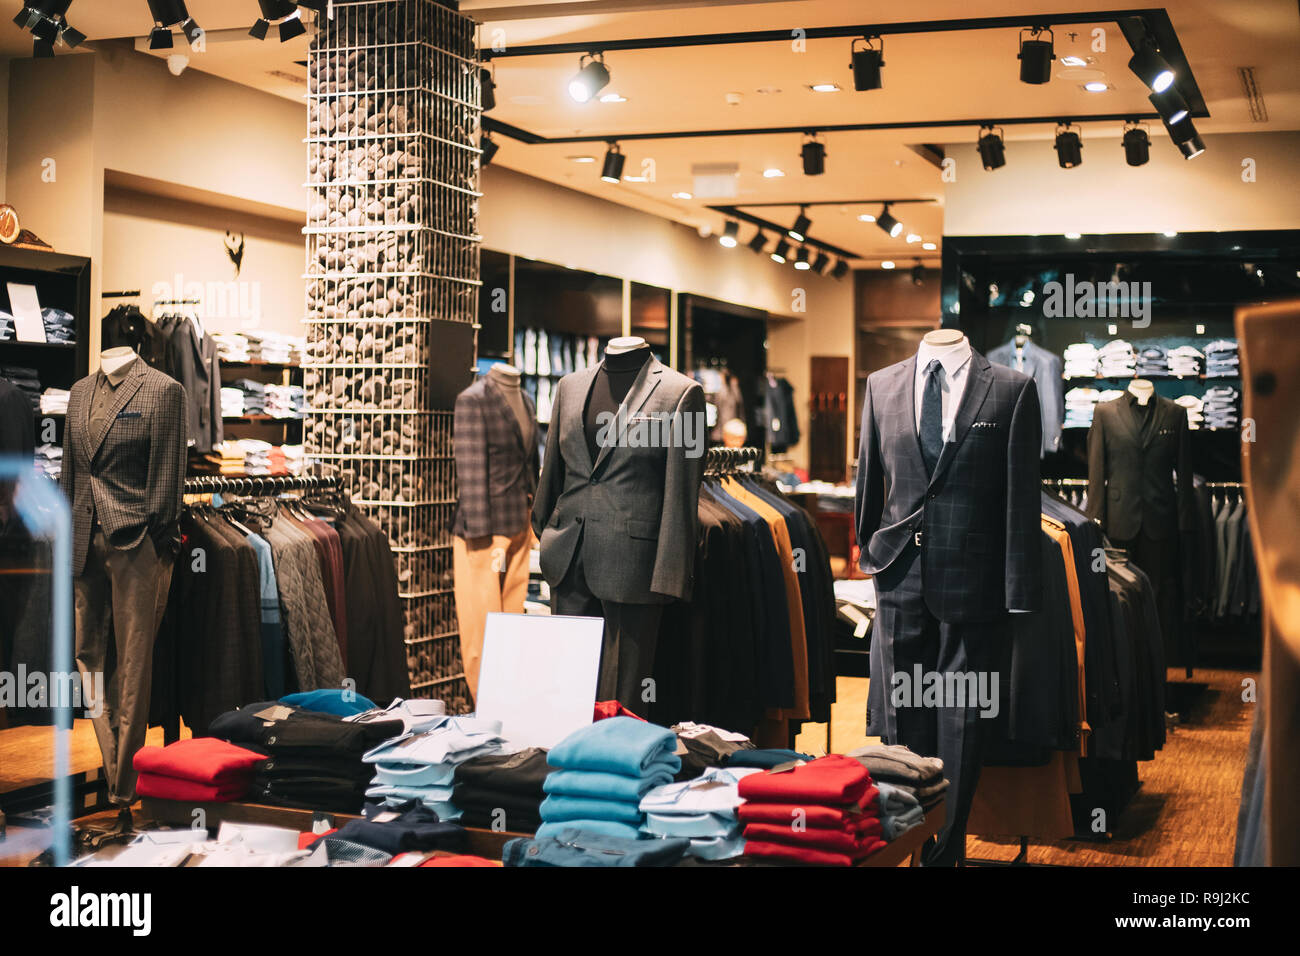 Male Business Style Clothing. Male Clothes On Mannequins And Hangers In Store Of Shopping Mall. Stock Photo